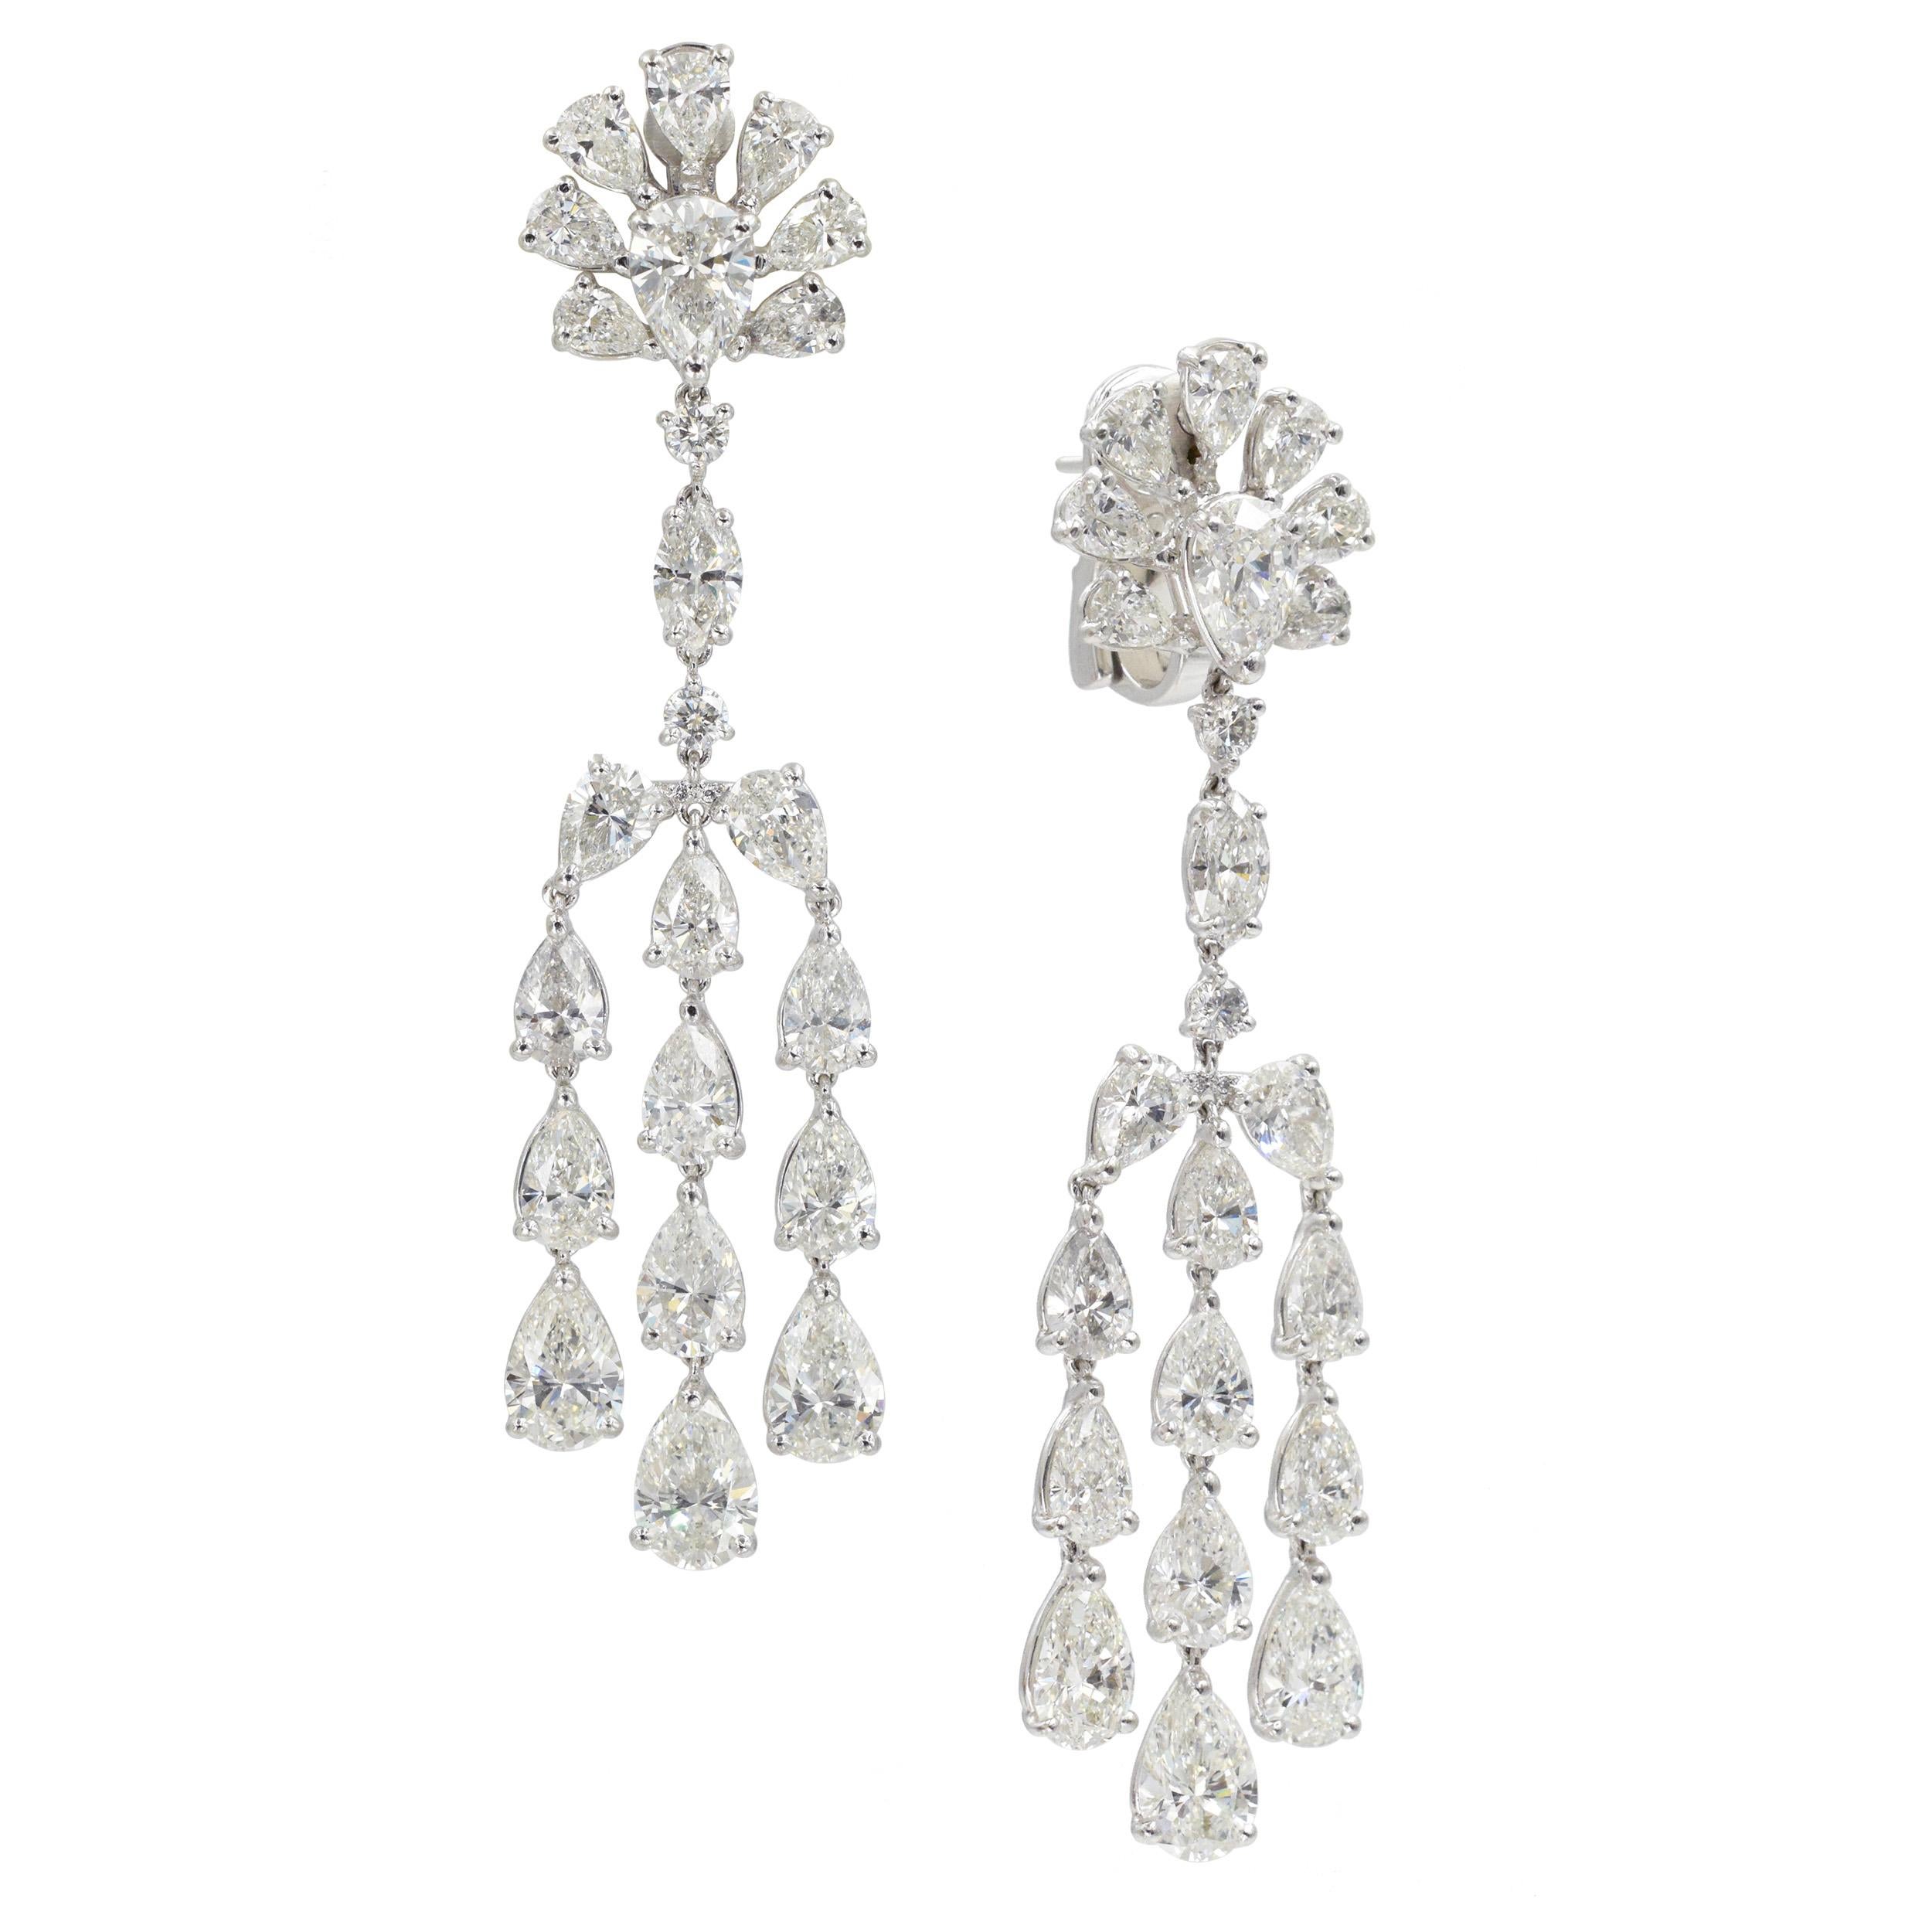 Diamond chandelier earrings in 18k white gold. The earrings feature cluster design at the top, with a three
stands of cascading diamonds drops. Equipped with the
post and omega back closure. Set with total of 40 pear shape diamonds, 4 round briliant